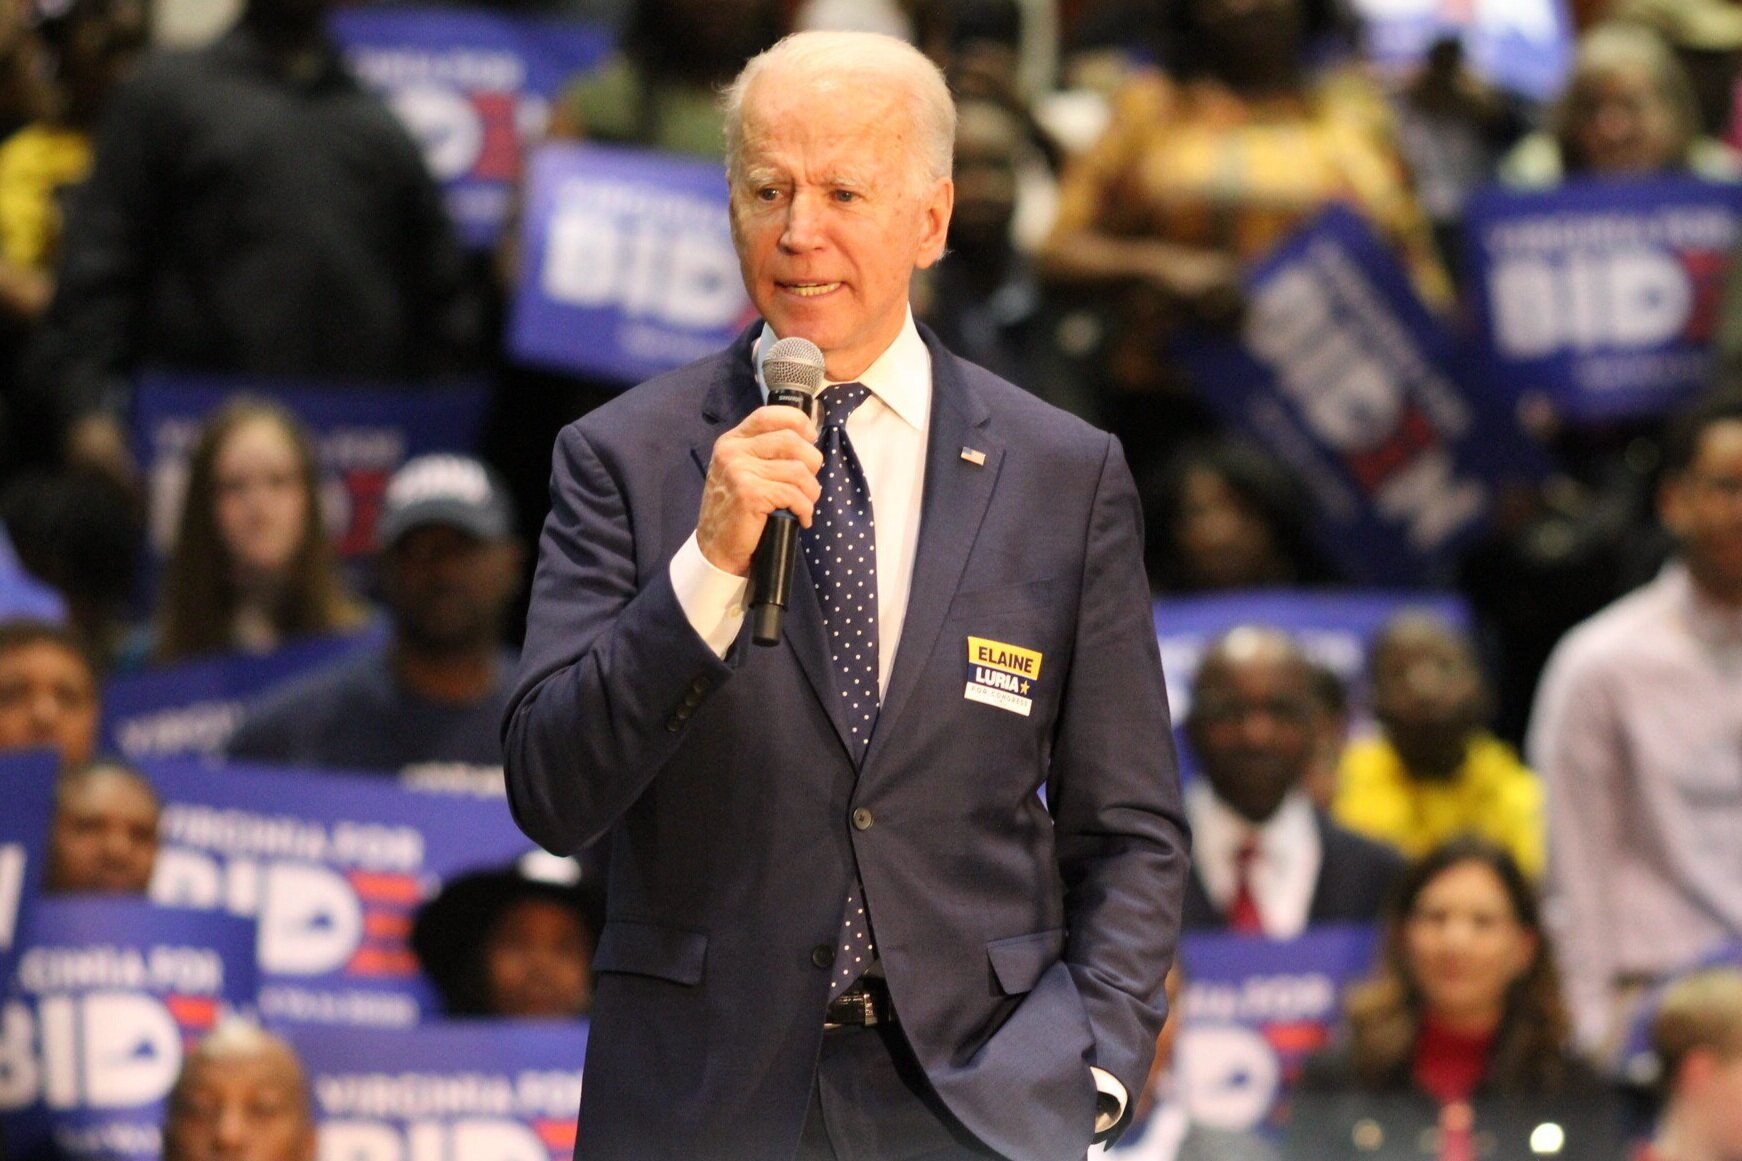 Former Vice-President Joe Biden, the projected winner of the 2020 Presidential Election against incumbent President Donald Trump, speaks at an event in Virginia. (Courtesy of Carter Marks / Royals Media)